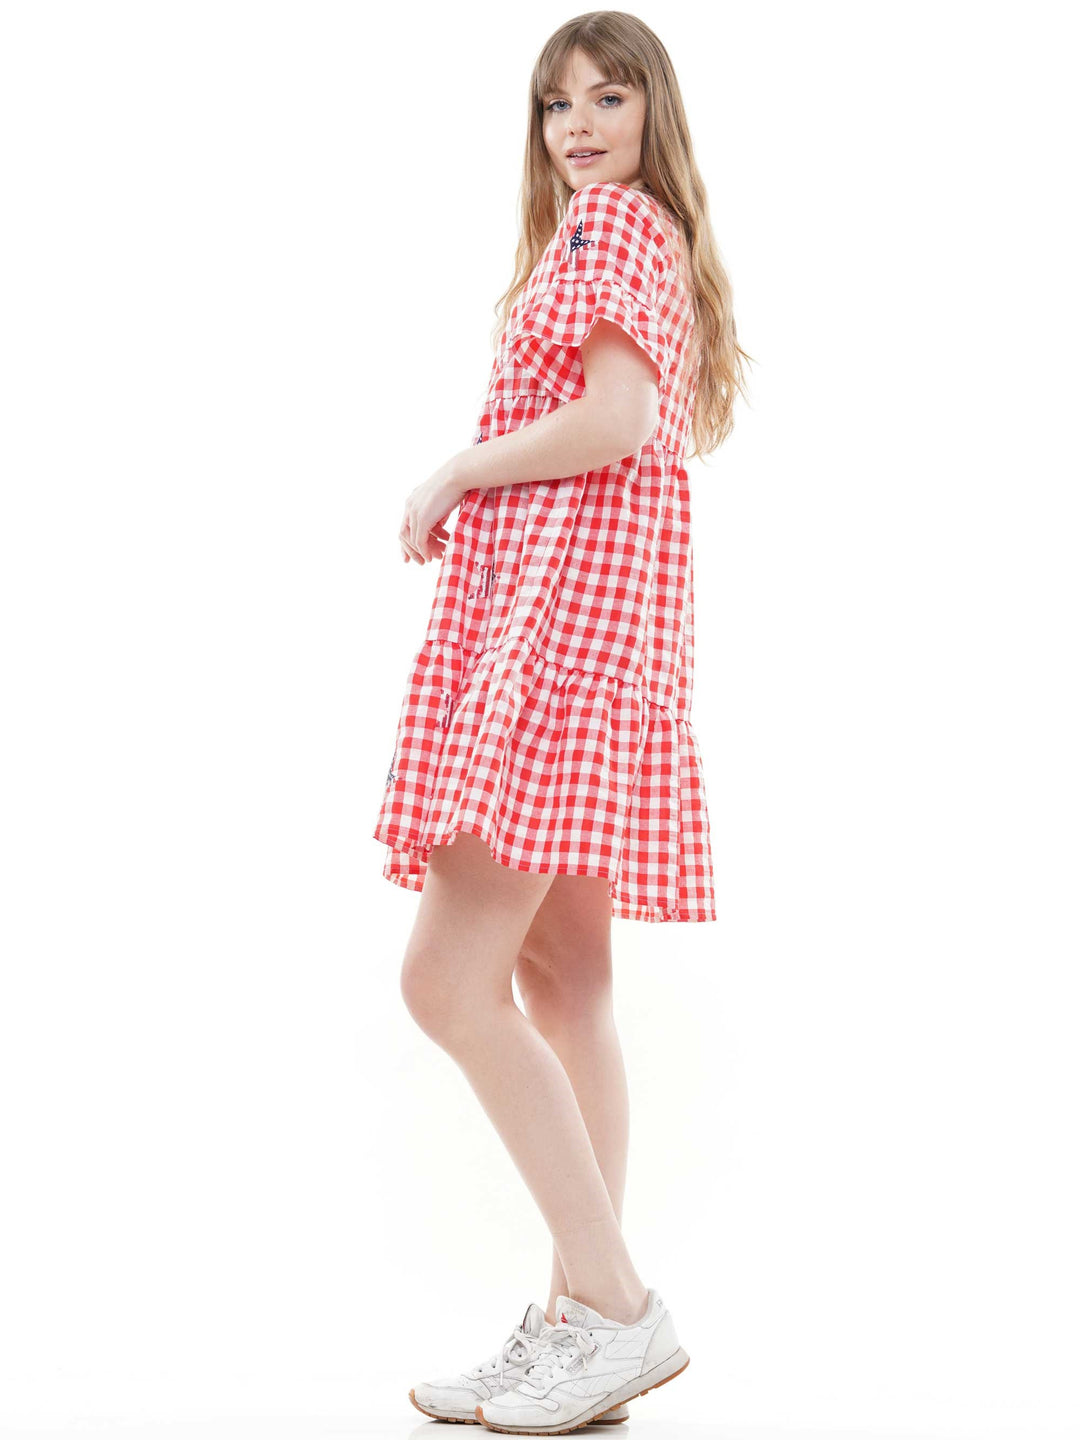 Multi Gingham Printed Dress With Star Embellishment